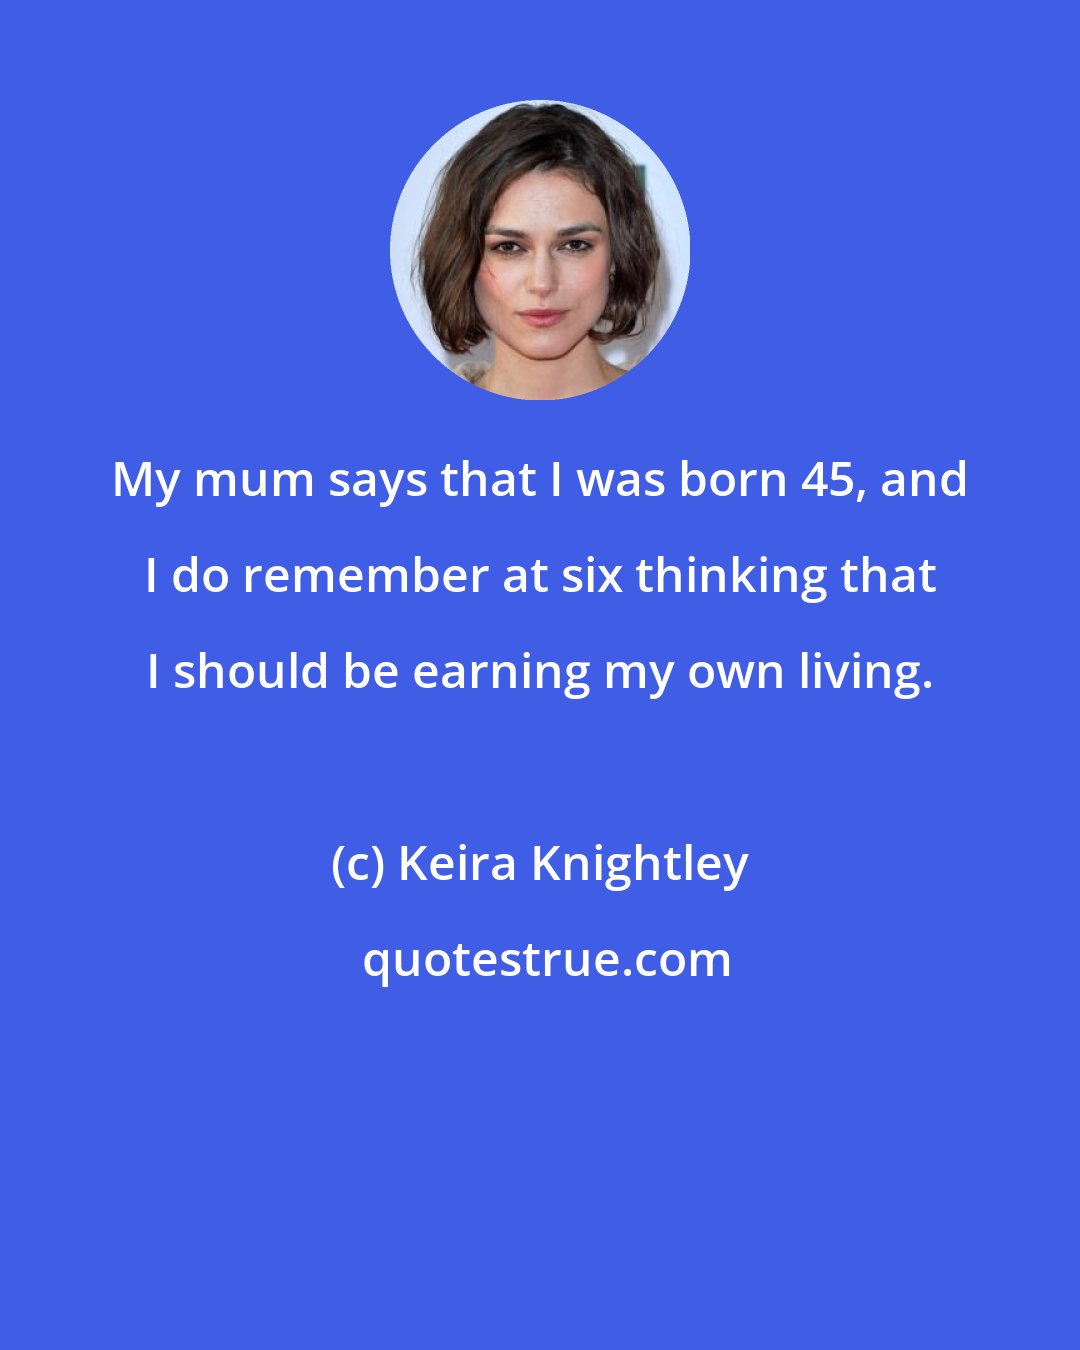 Keira Knightley: My mum says that I was born 45, and I do remember at six thinking that I should be earning my own living.